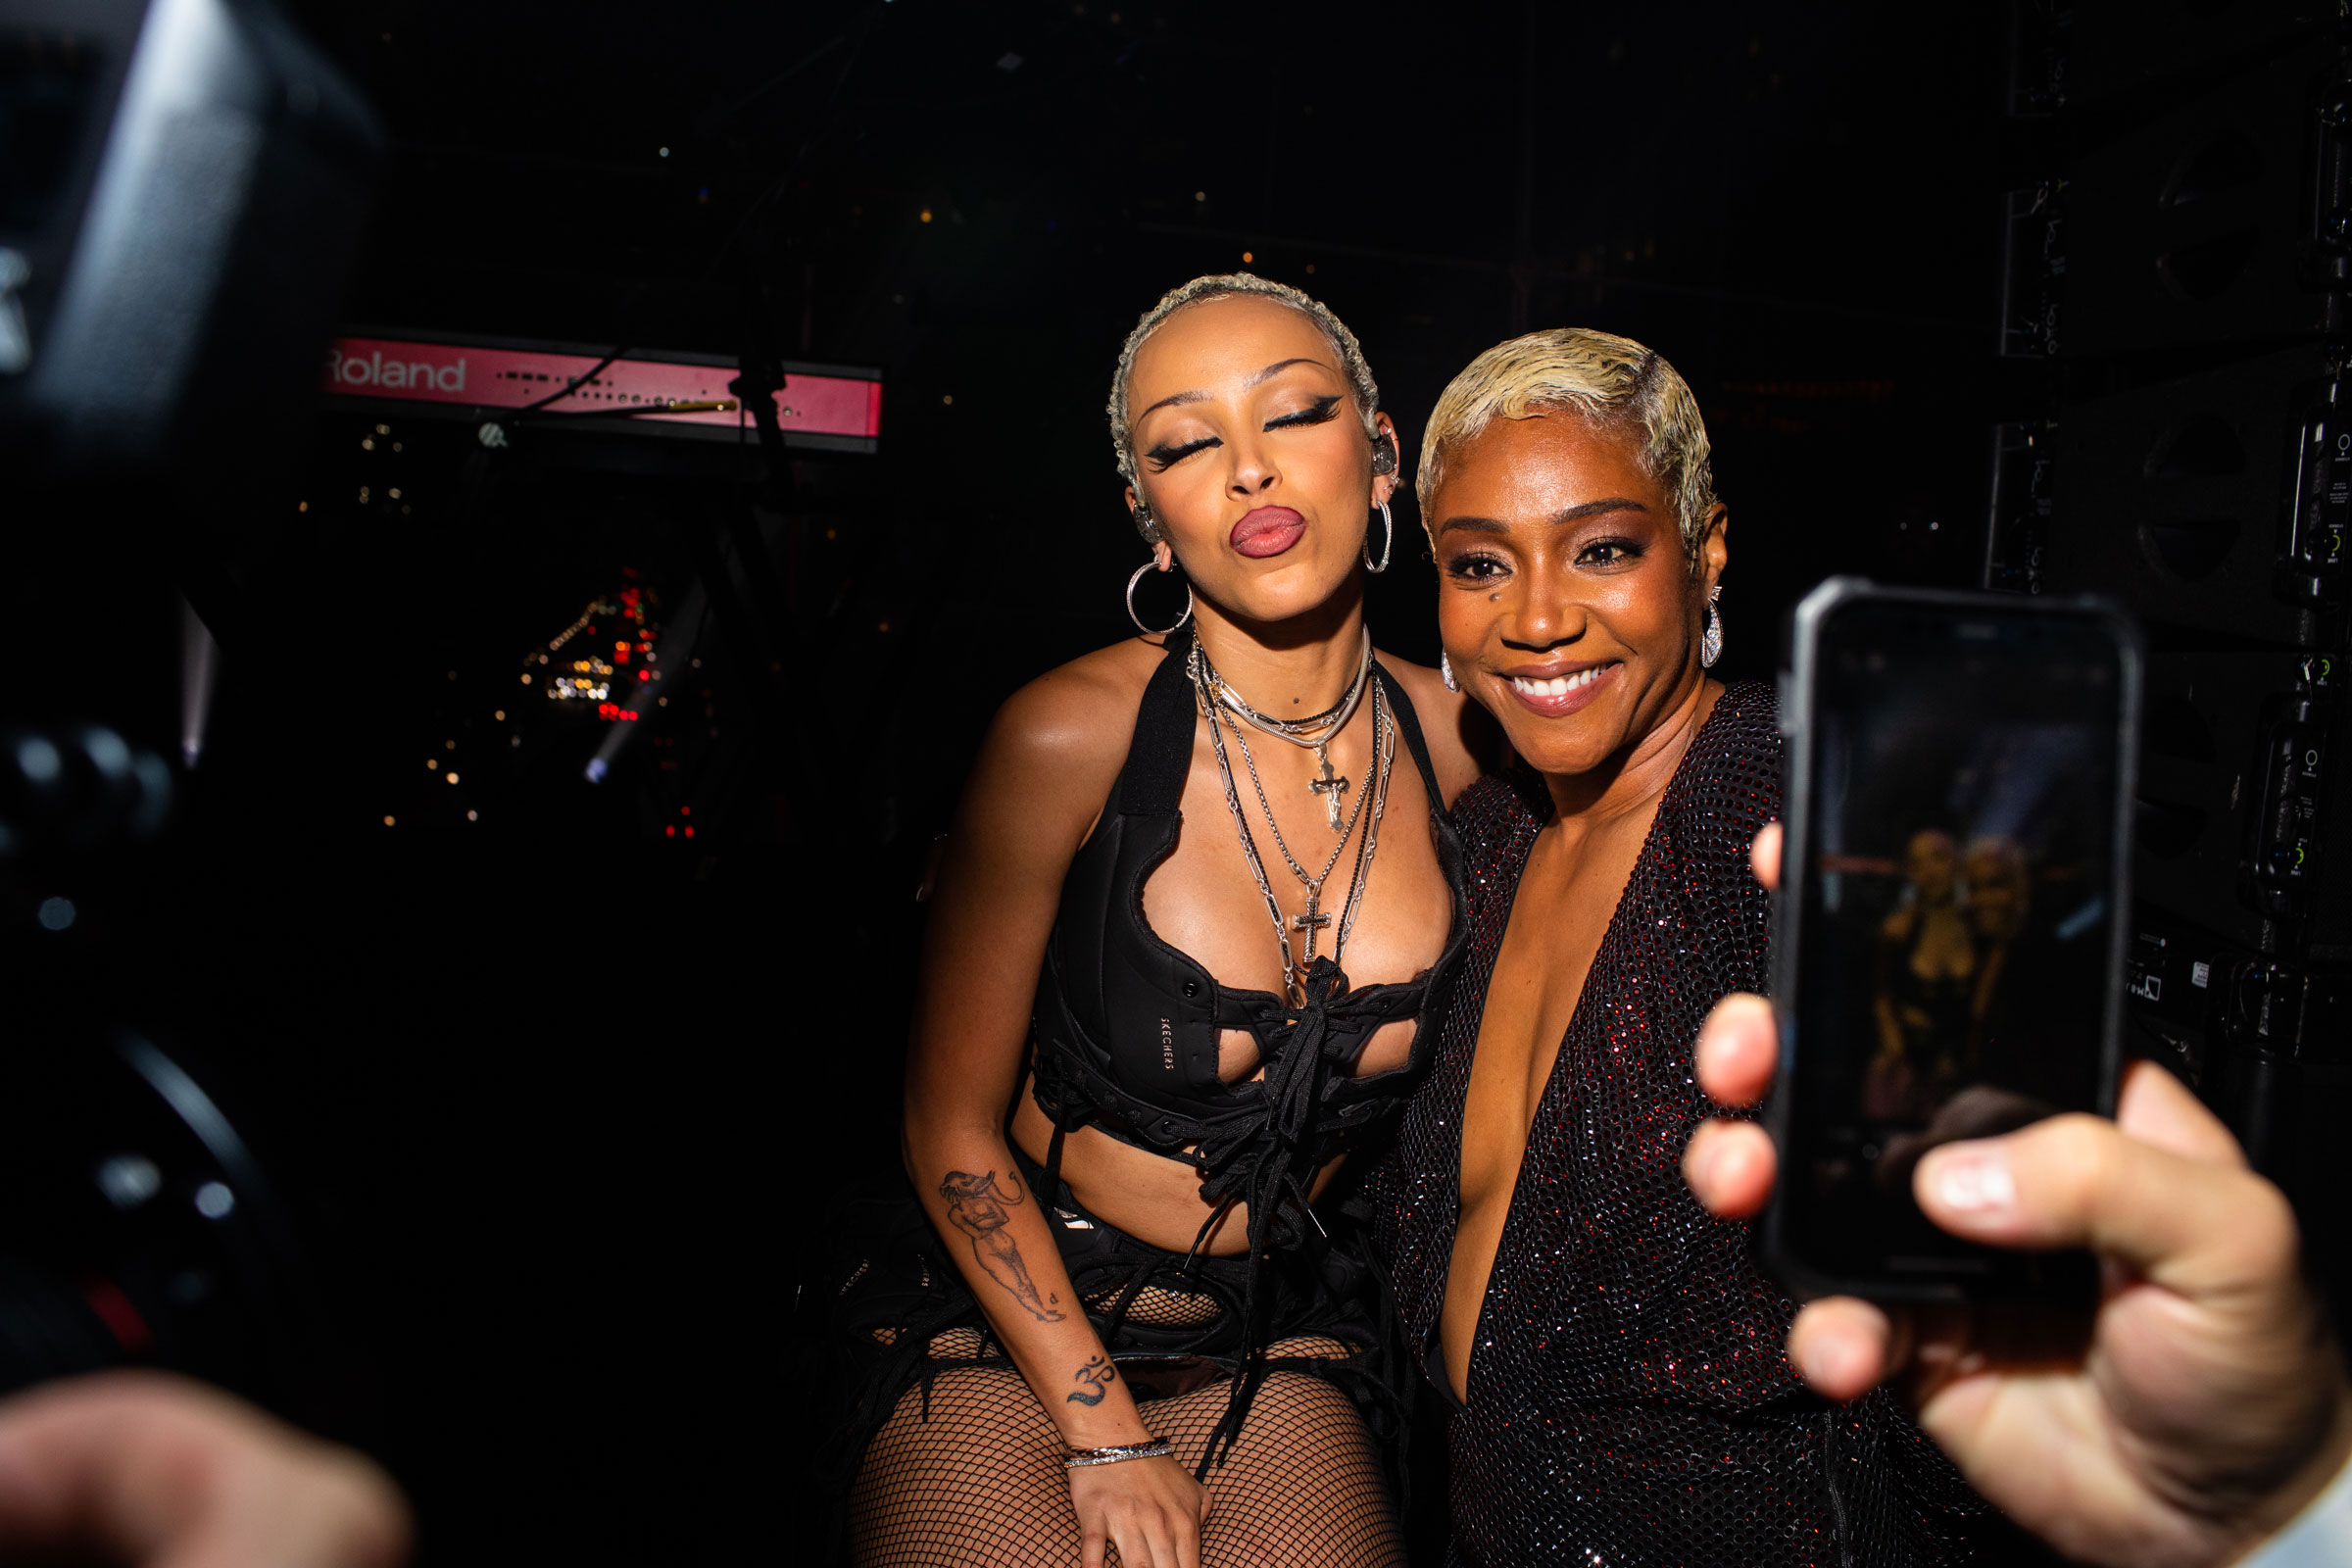 Doja Cat and Tiffany Haddish during the TIME 100 Gala at Jazz at Lincoln Center in New York City, on April 26, 2023. (Landon Nordeman for TIME)